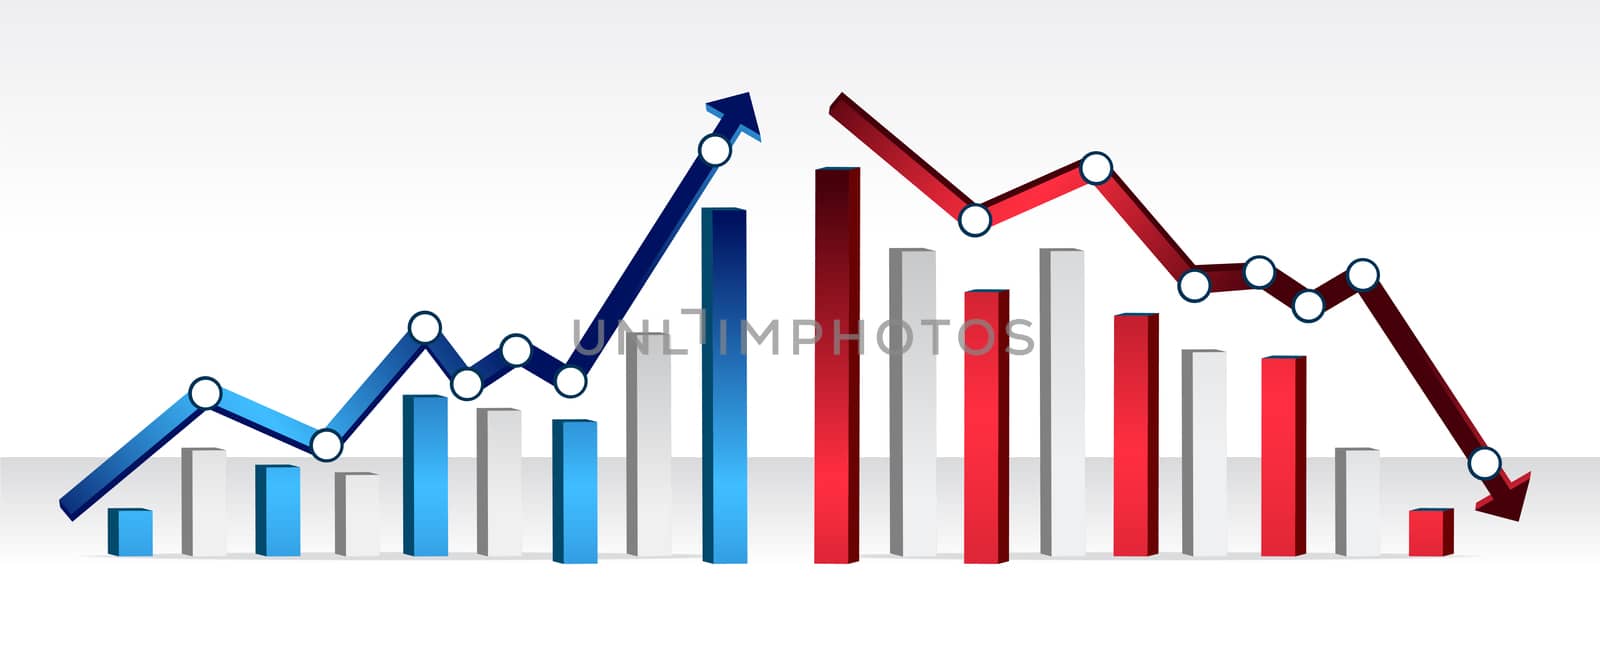 Up and down financial chart illustration design